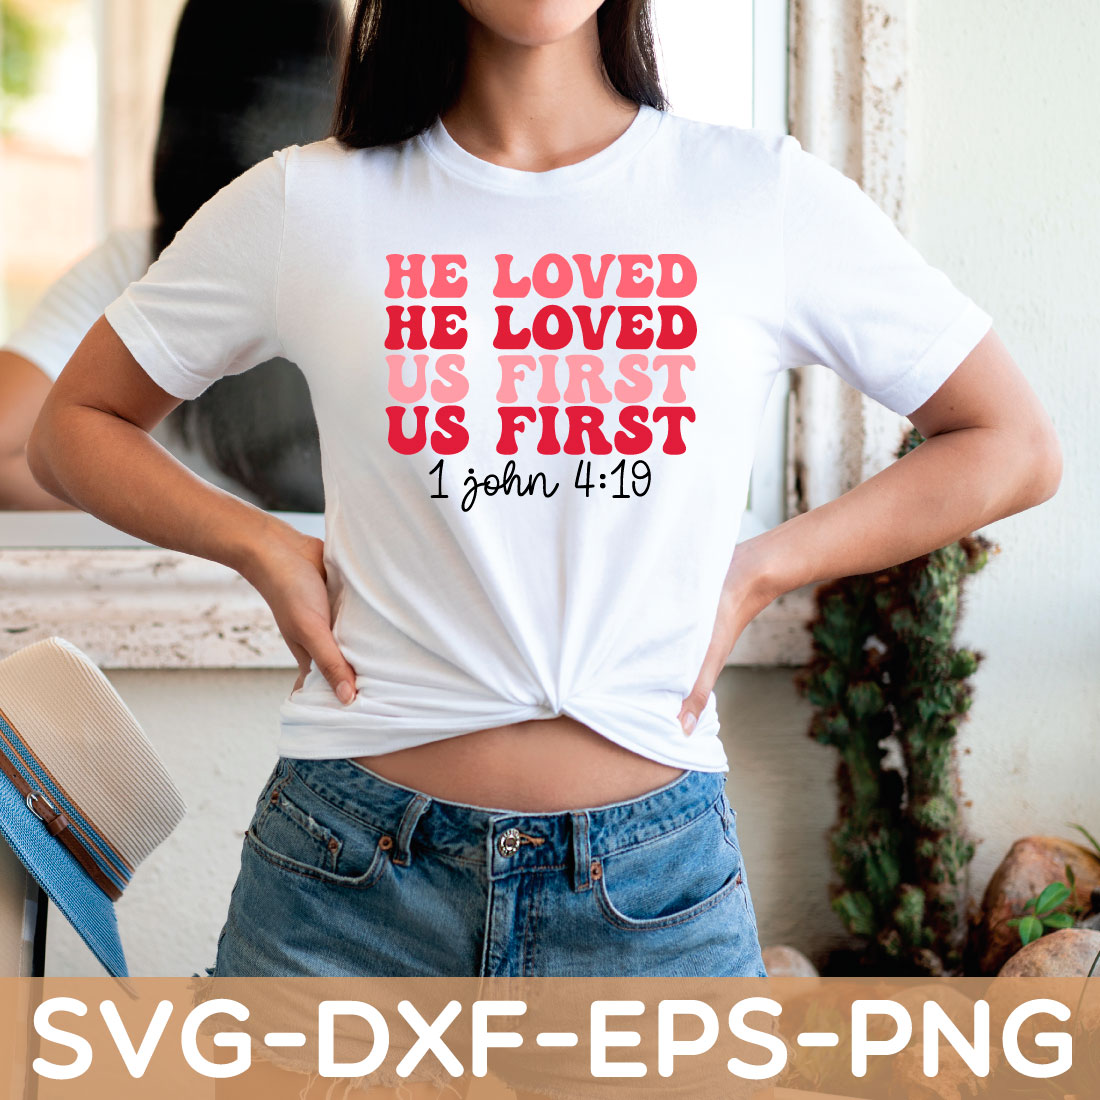 we love because he first loved us 1 john 4:19 retro preview image.